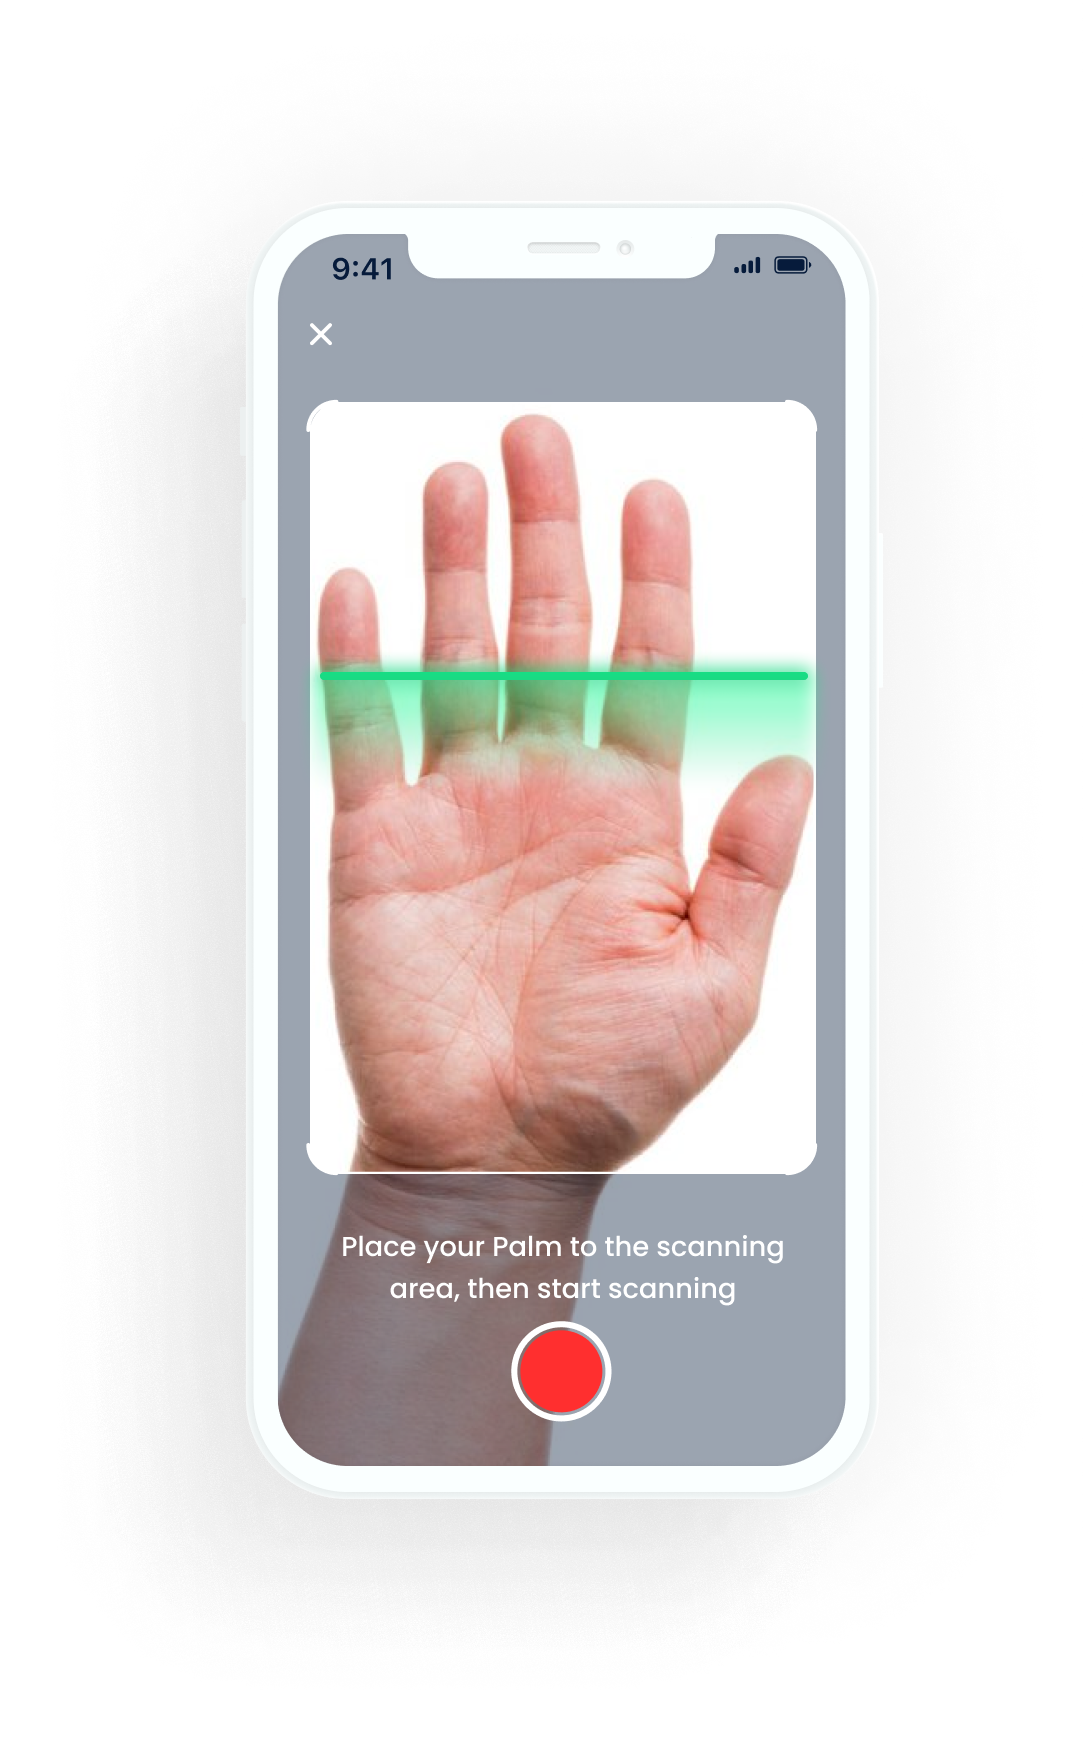 Palm authentication solutions